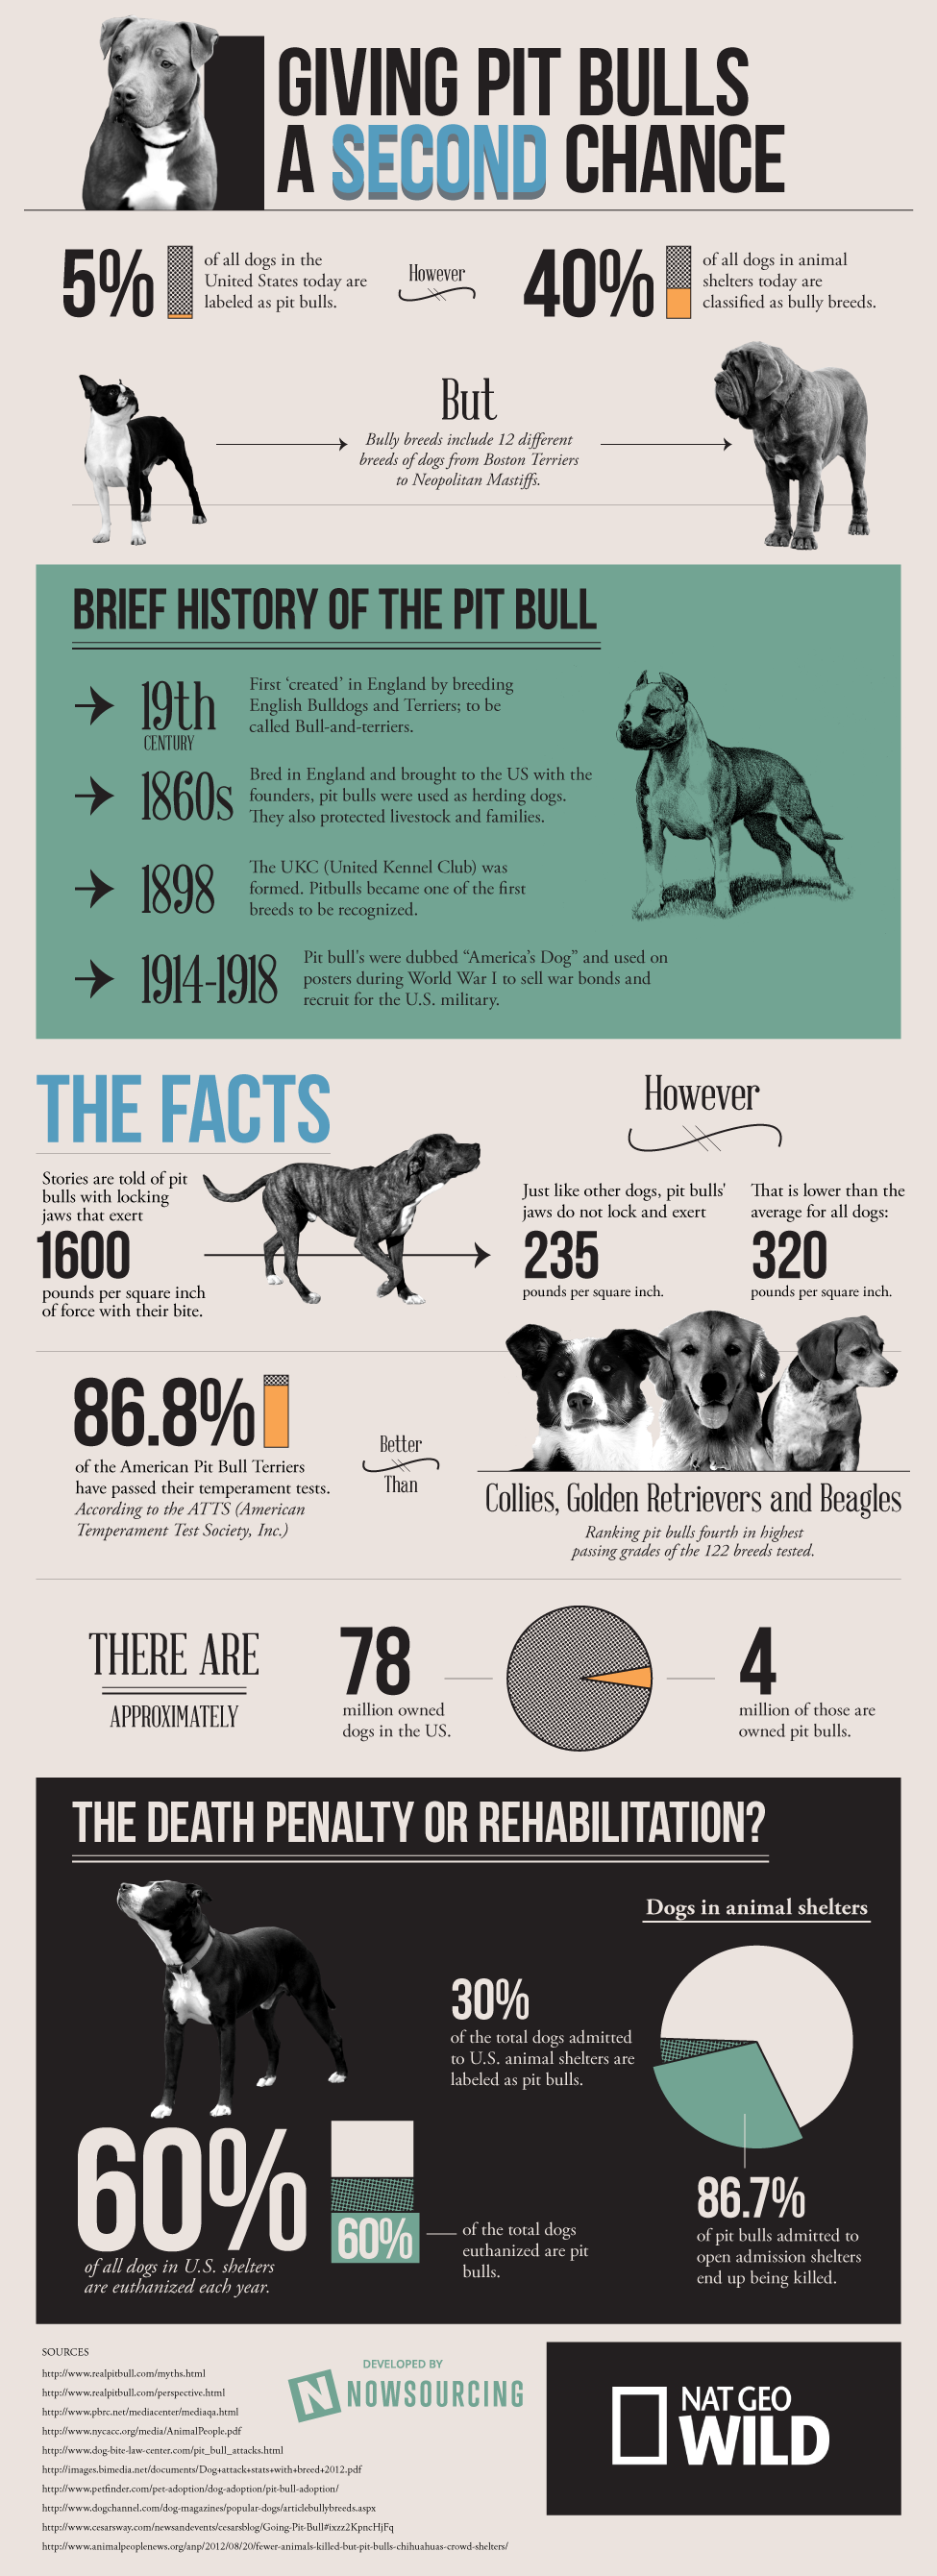 The facts about pit bulls